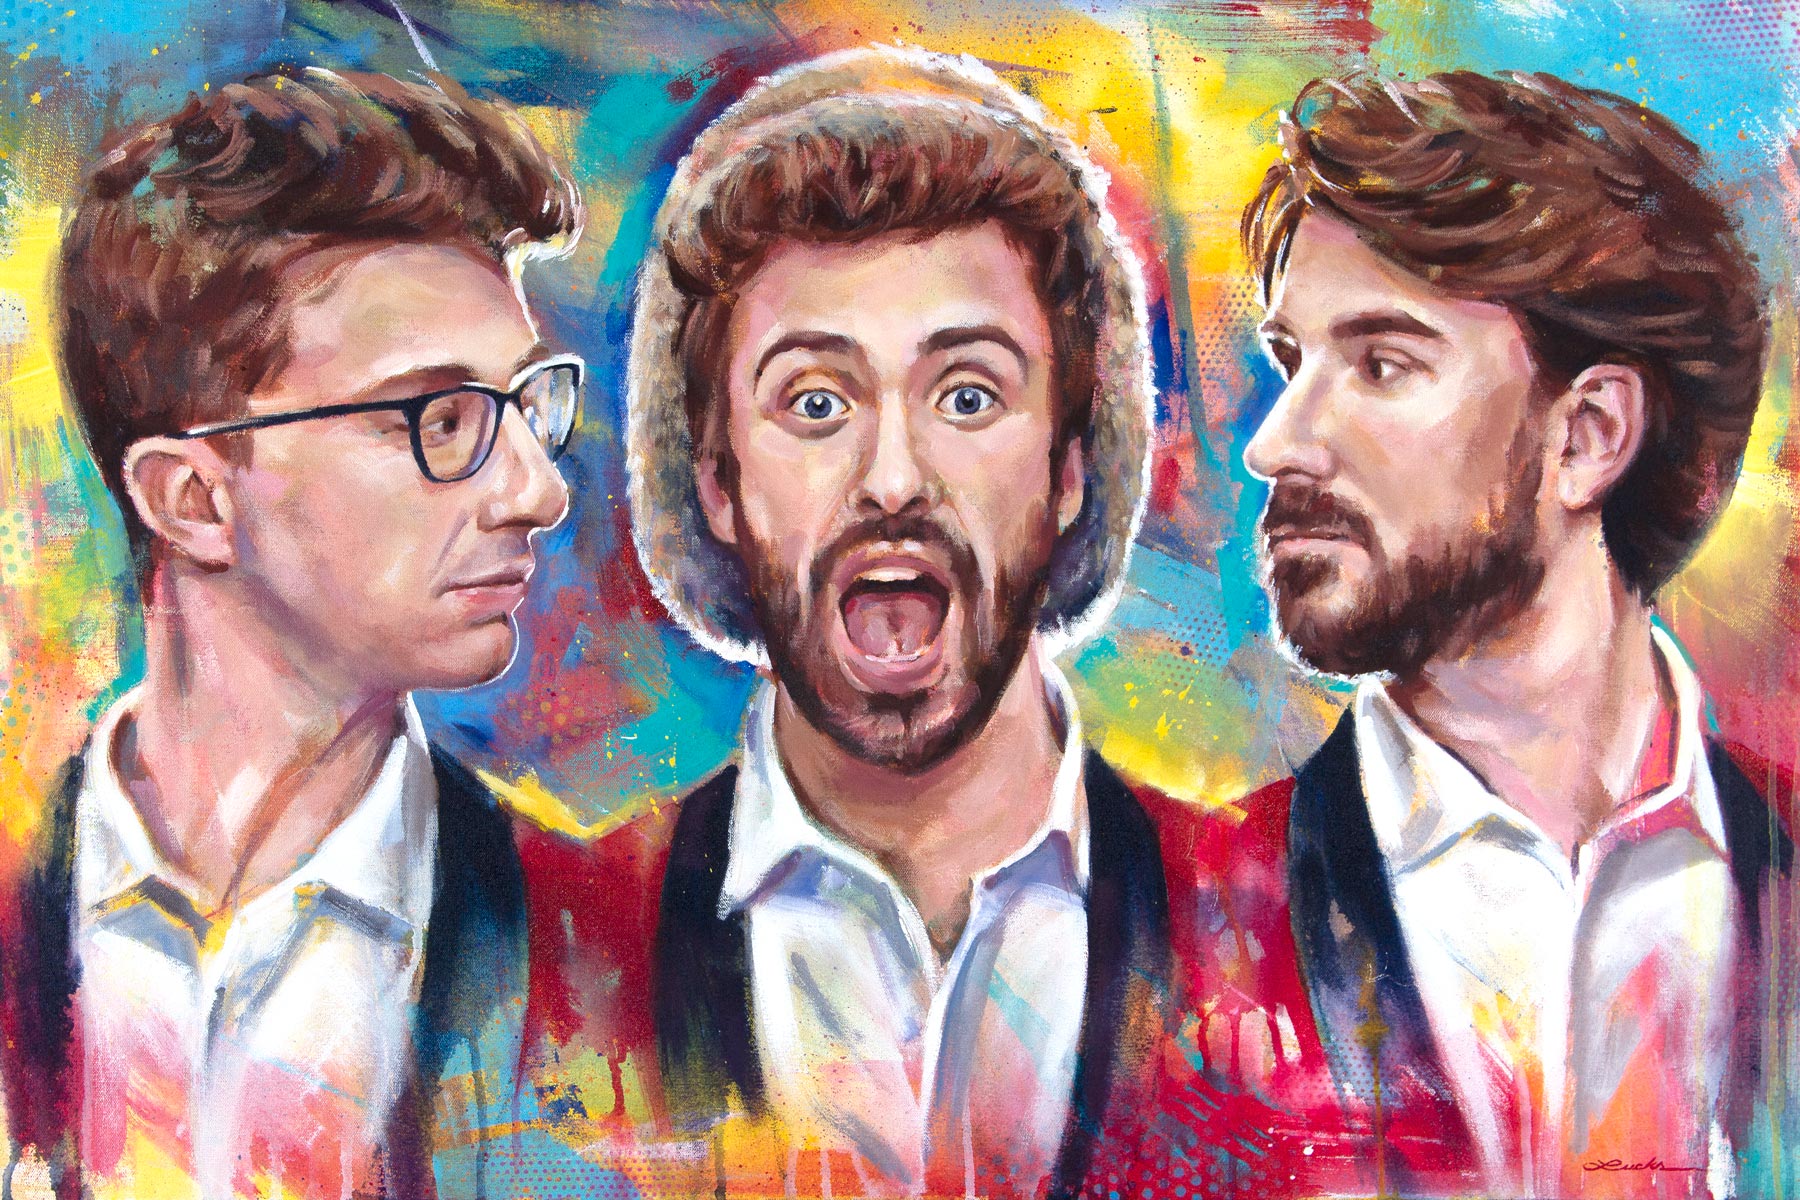 New release: AJR "Bang!"